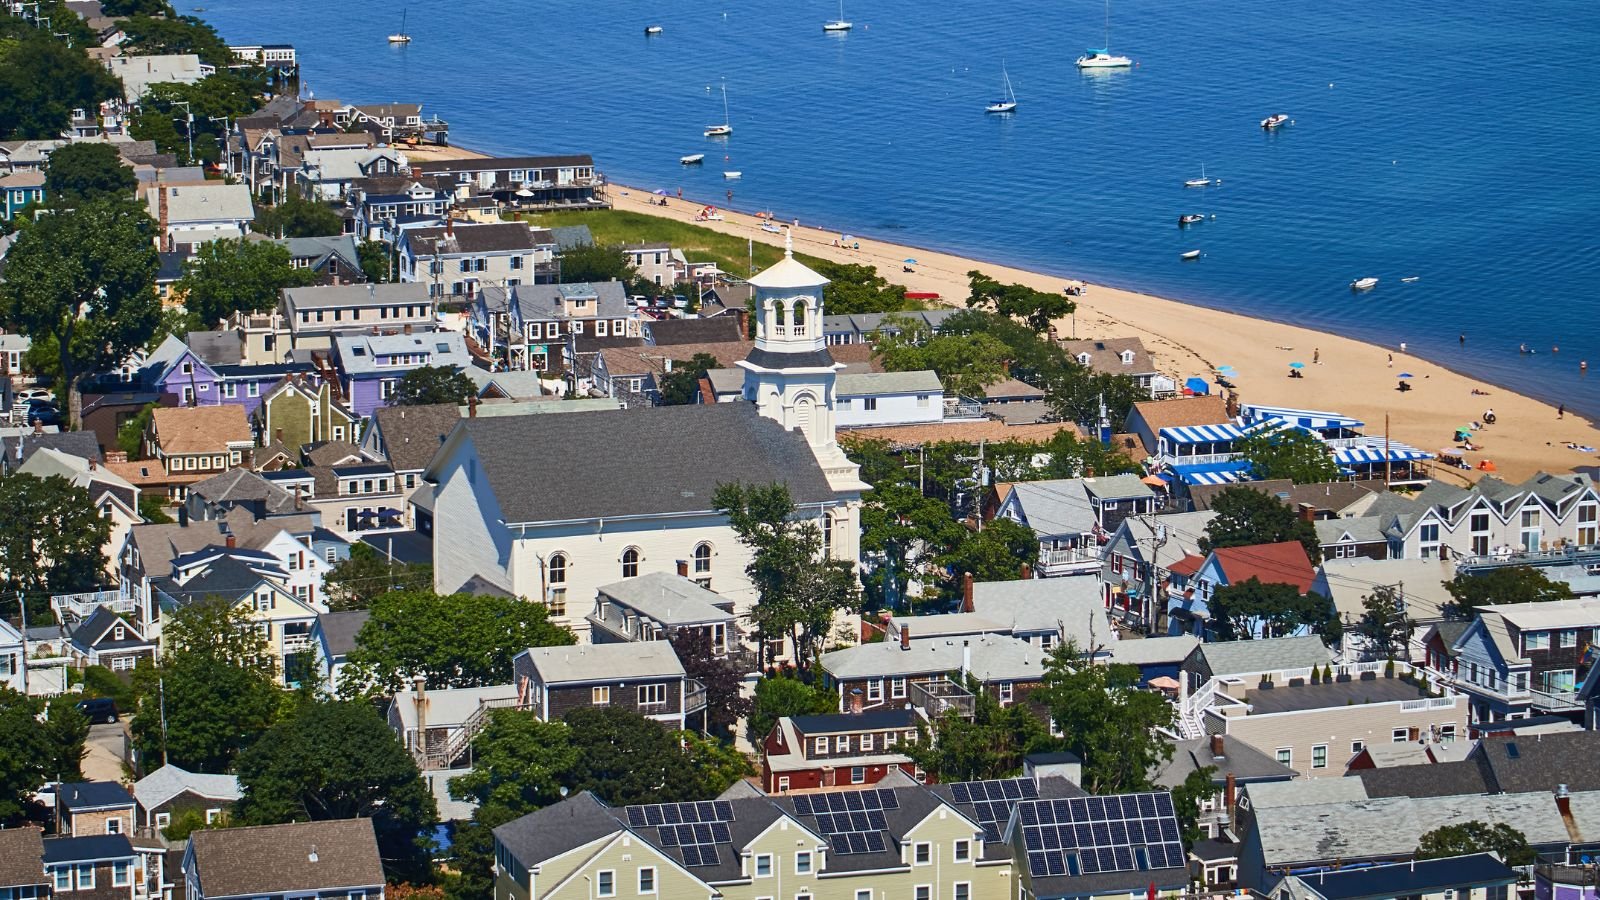 <p>Cape Cod has classic New England seaside villages. It has sandy beaches and seafood shacks. For generations, families have loved it. The mild climate, scenic lighthouses, and beaches make it  an ideal choice for seniors.</p>